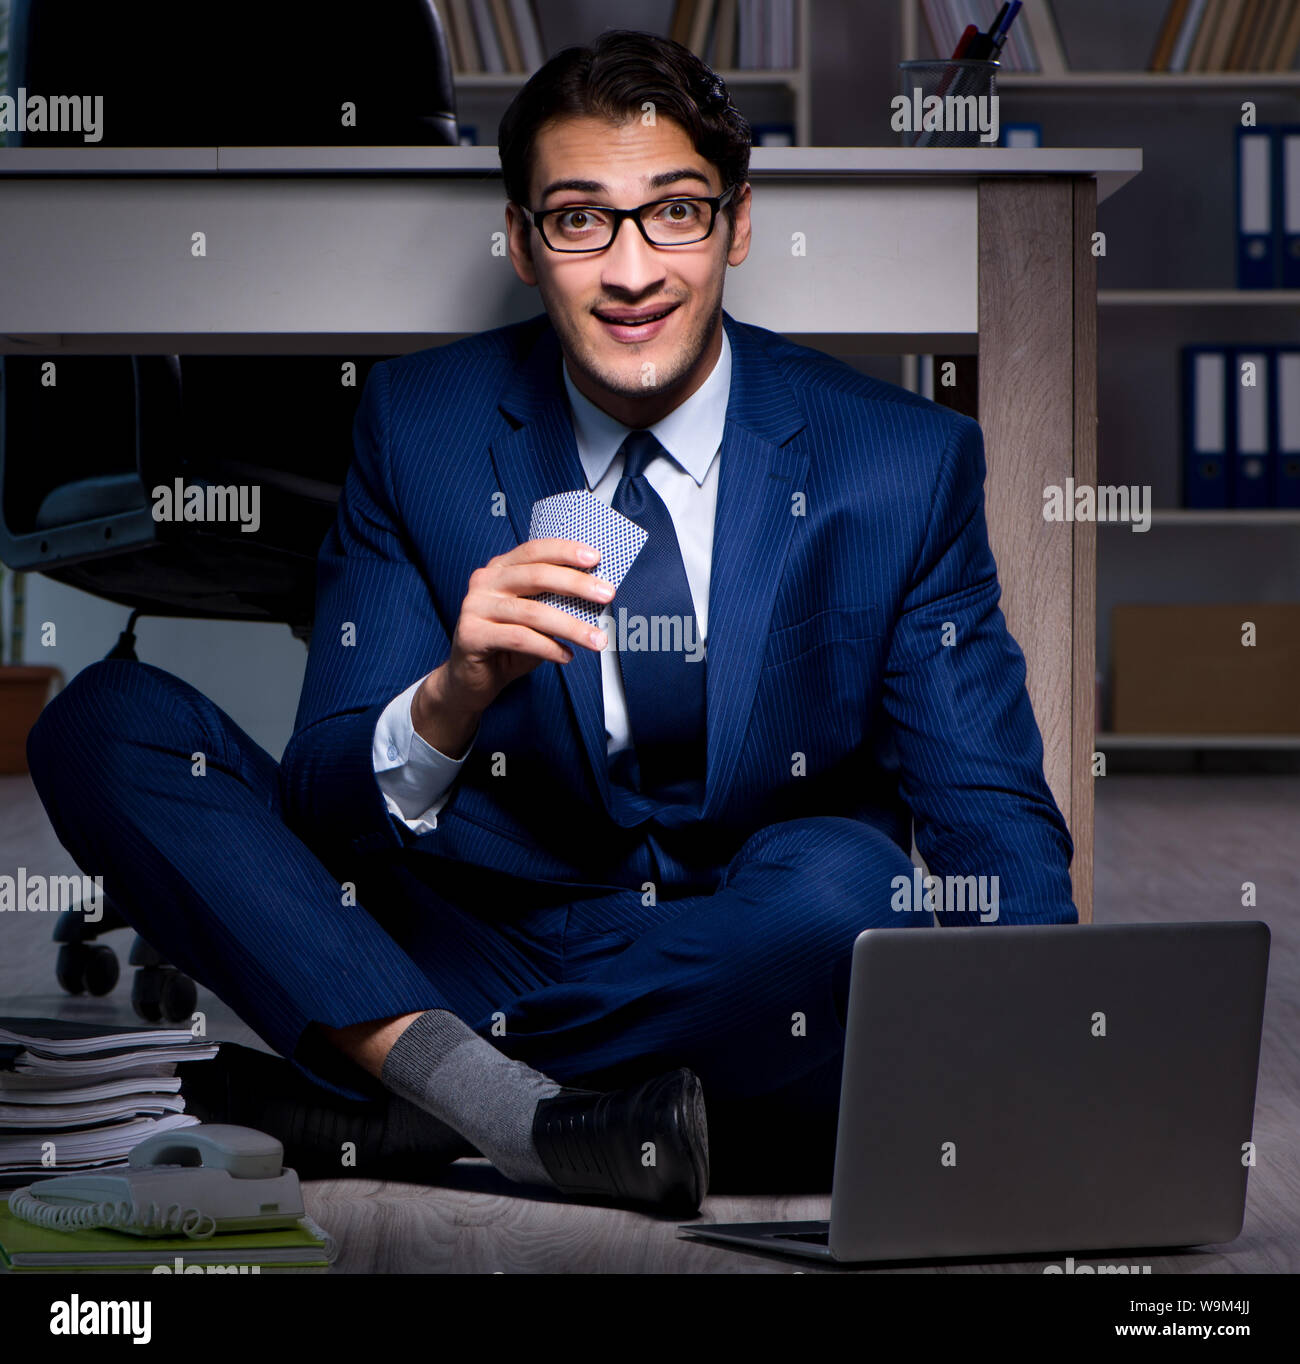 The businessman working overtime long hours late in office Stock Photo